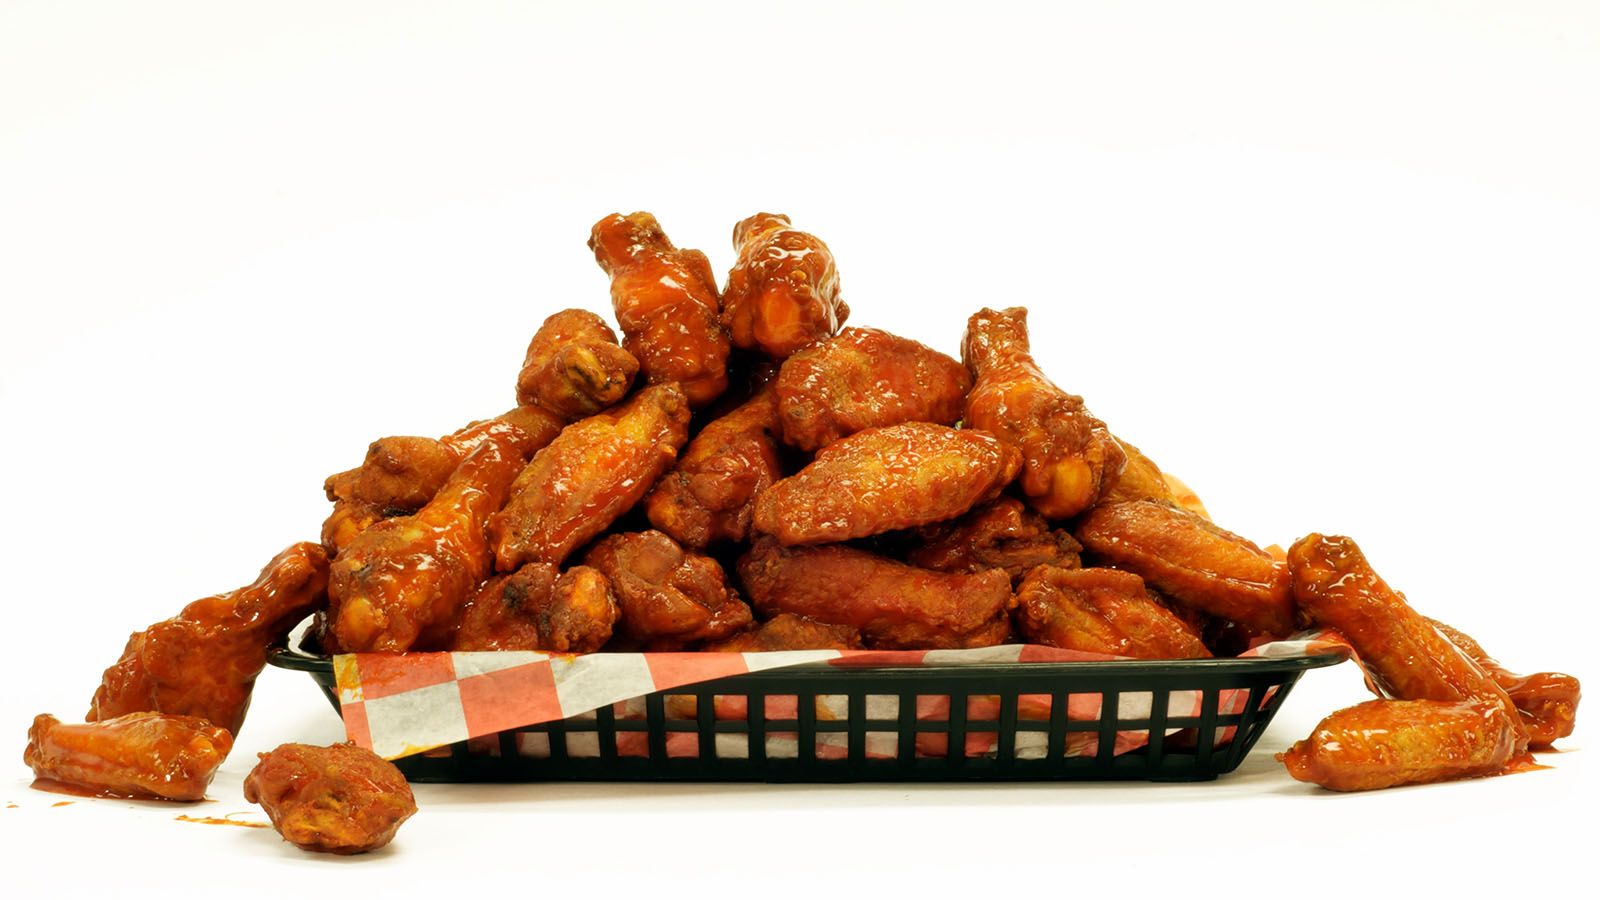 There will be plenty of wings to go around at the Wings Beer & Bourbon Festival at Headwaters Park on Aug. 19.